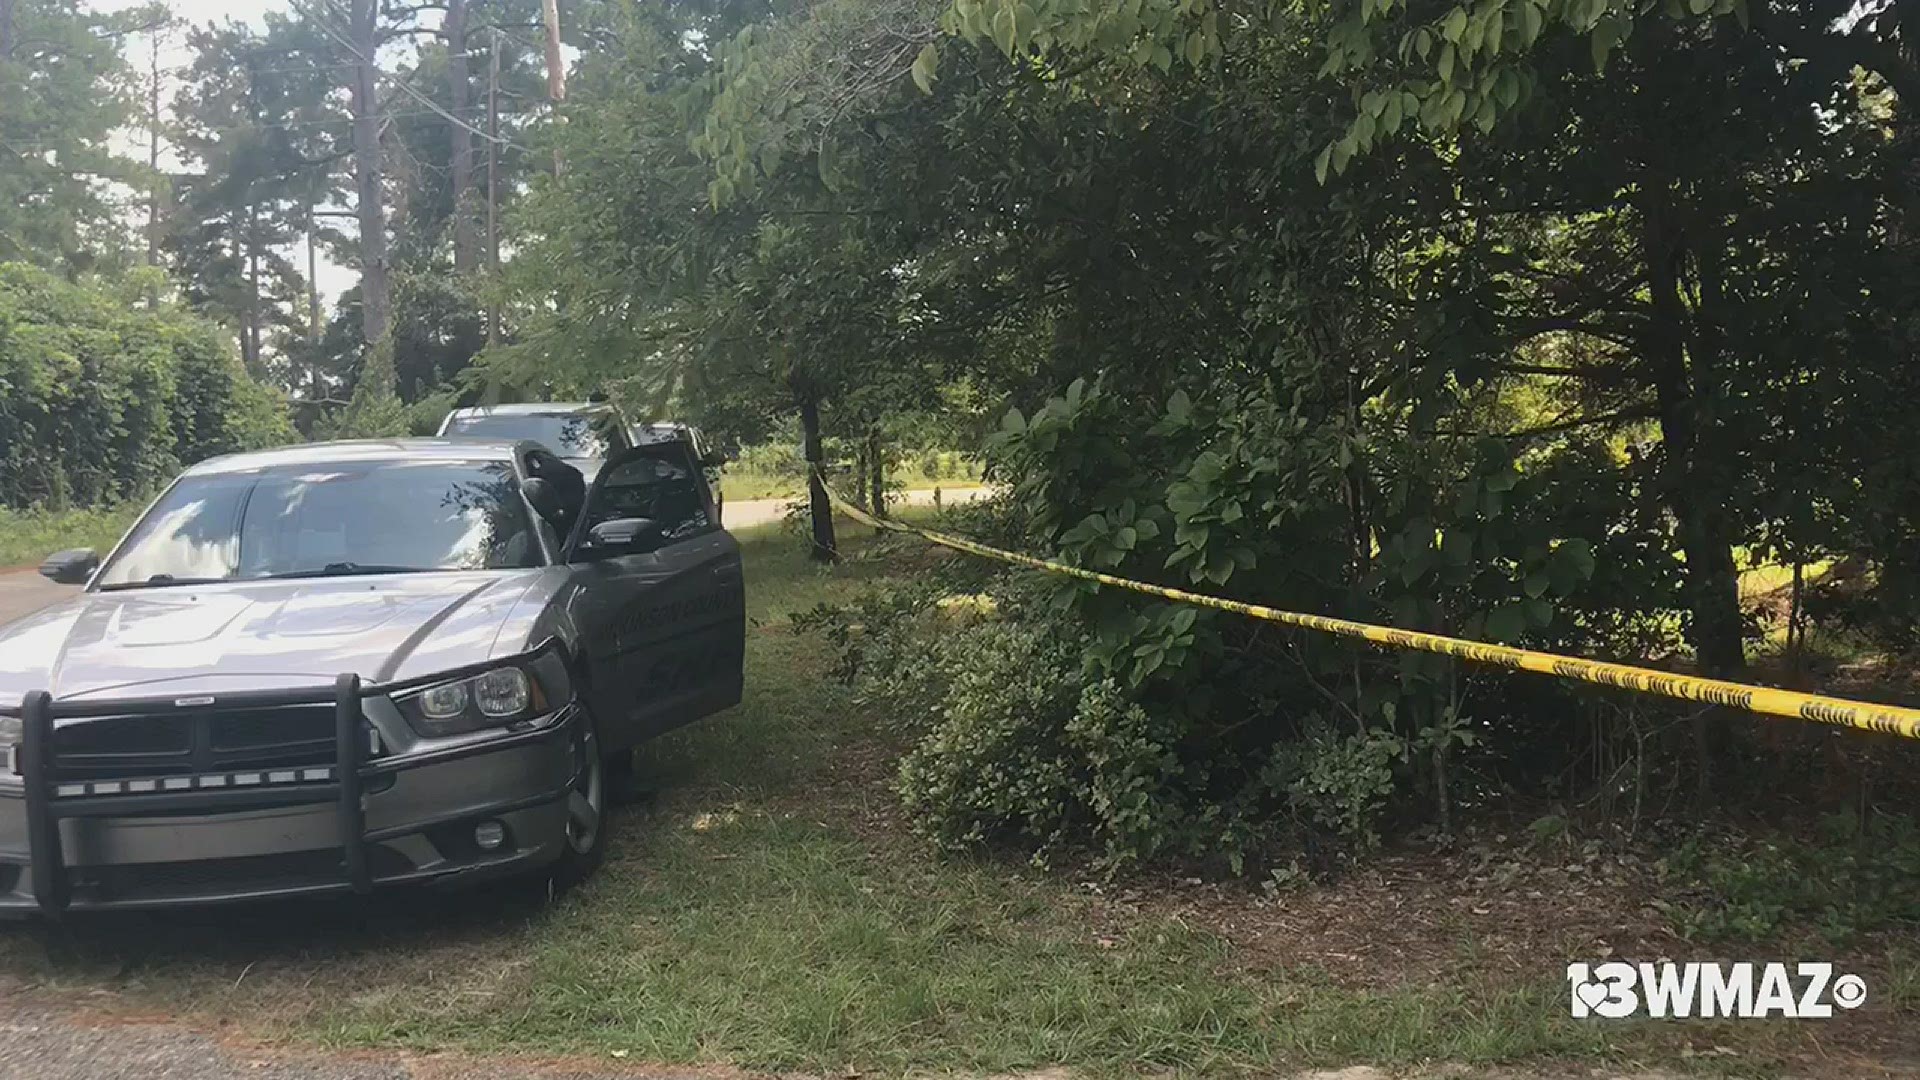 The GBI is investigating after the death of a 12-year-old in Wilkinson County Wednesday